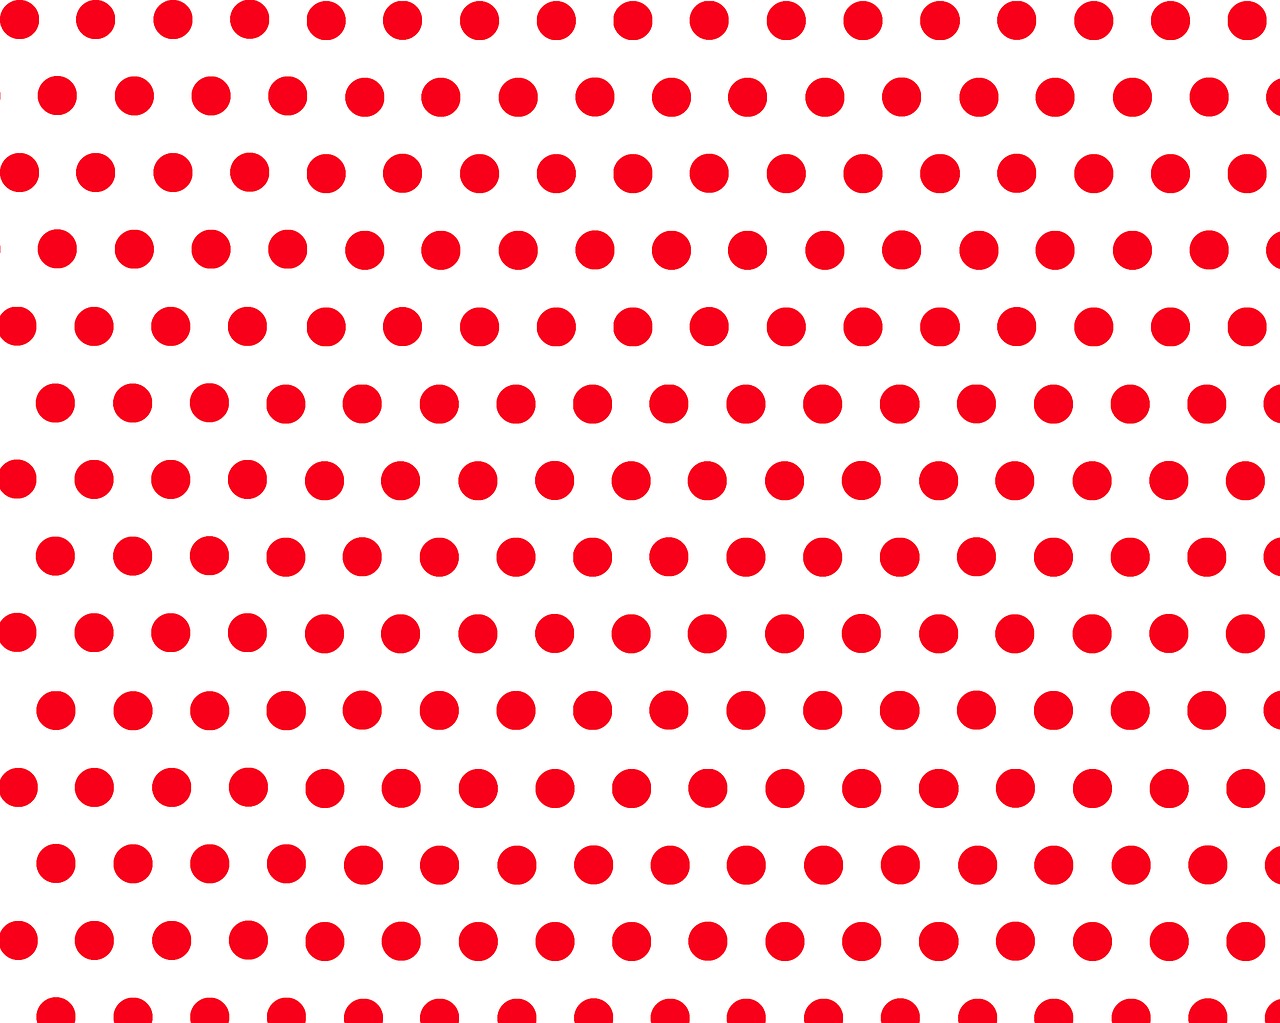 background polka dots red free photo